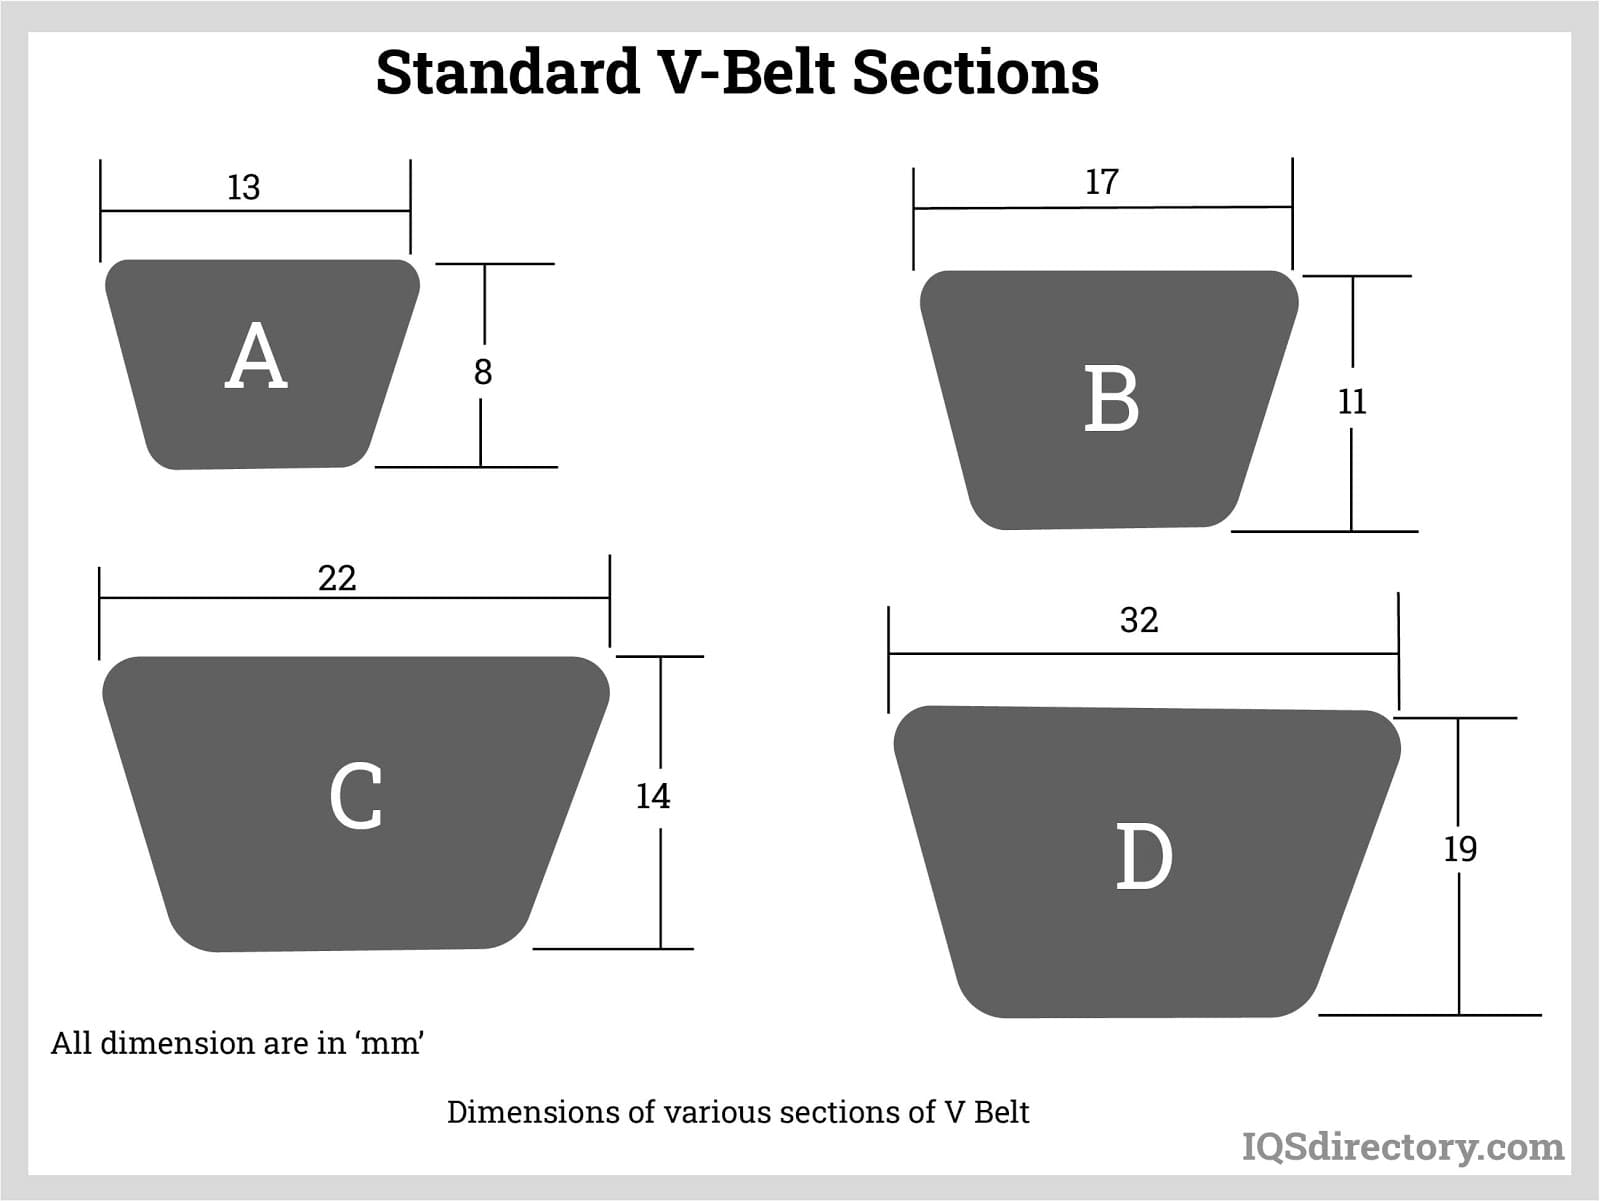 How to Identify a V-Belt?